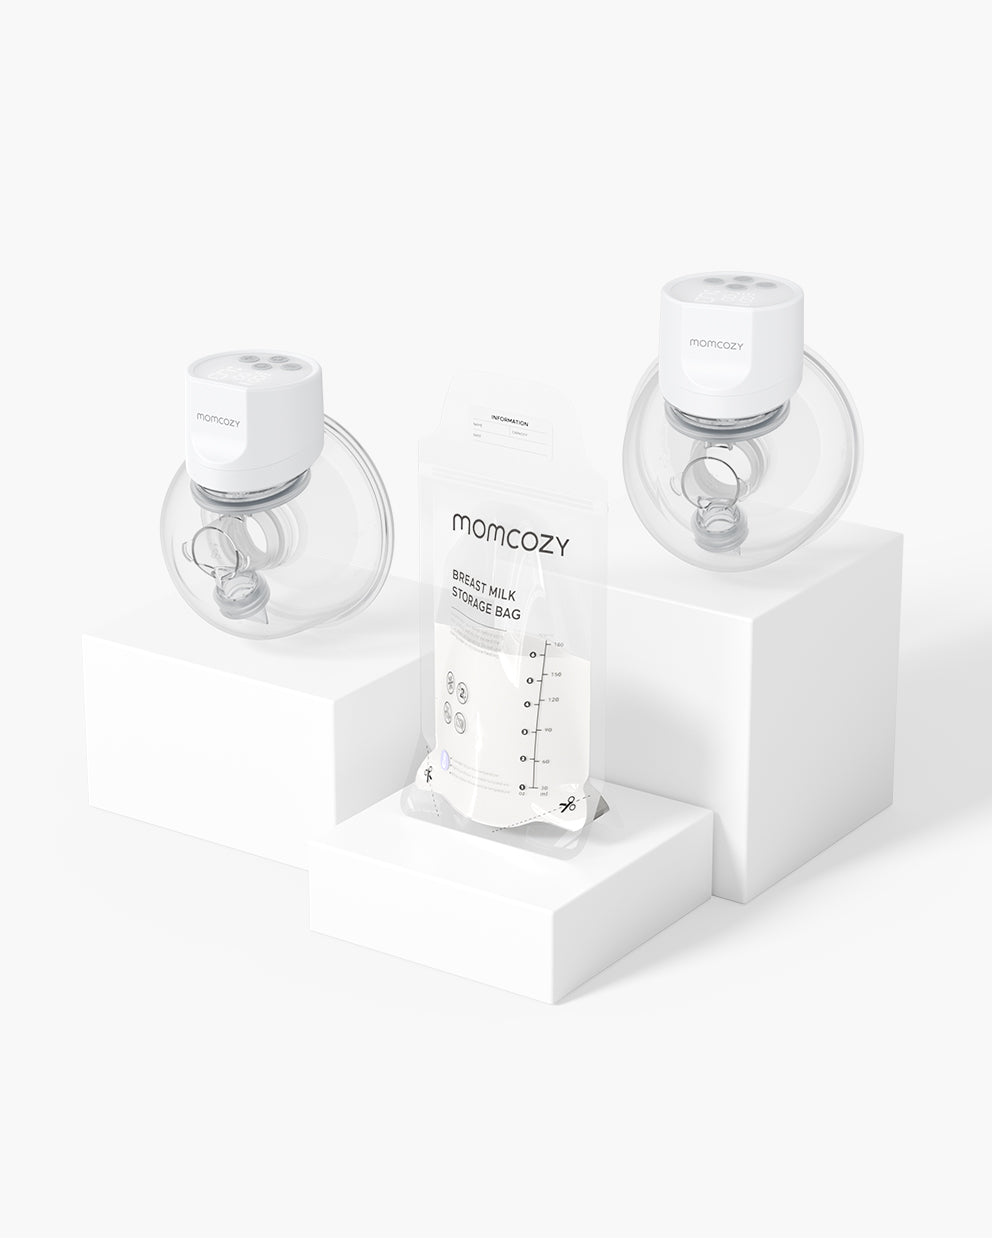 Momcozy M5 vs S12Pro, Which breast pump is the best?